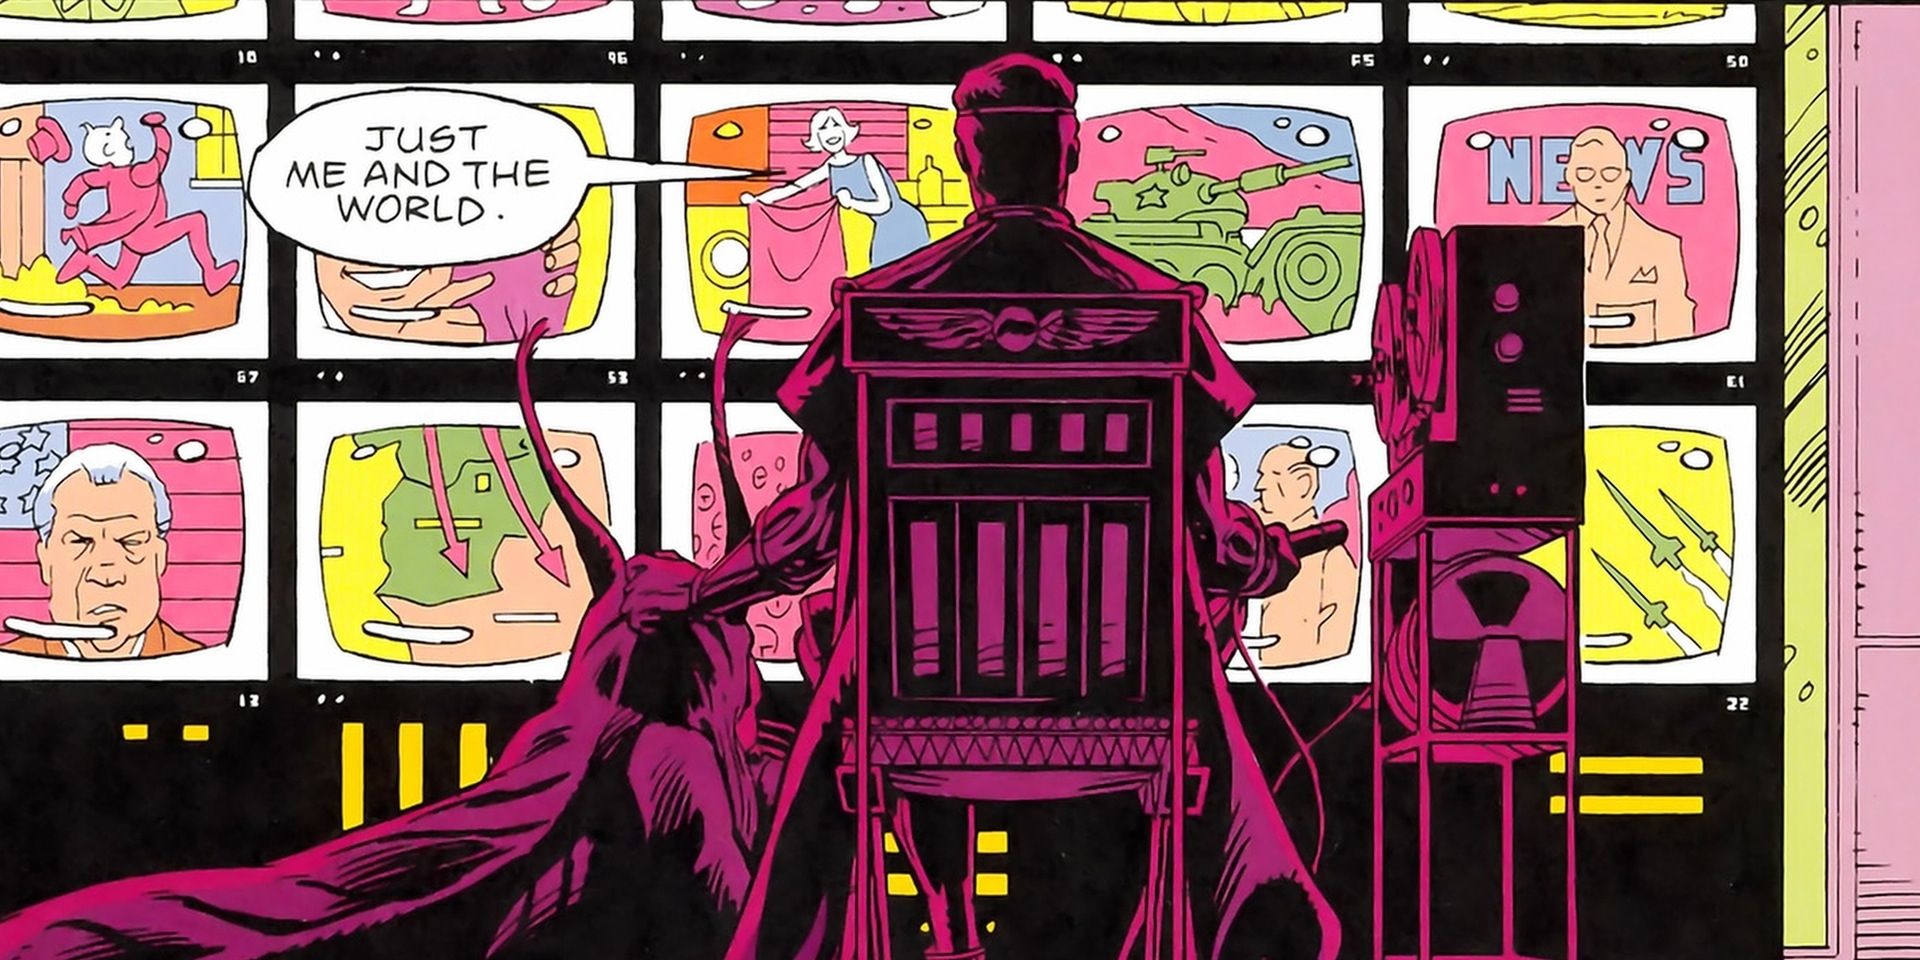 How Did Watchmen's Adrian Veitch Contract Cancer in Doomsday Clock?